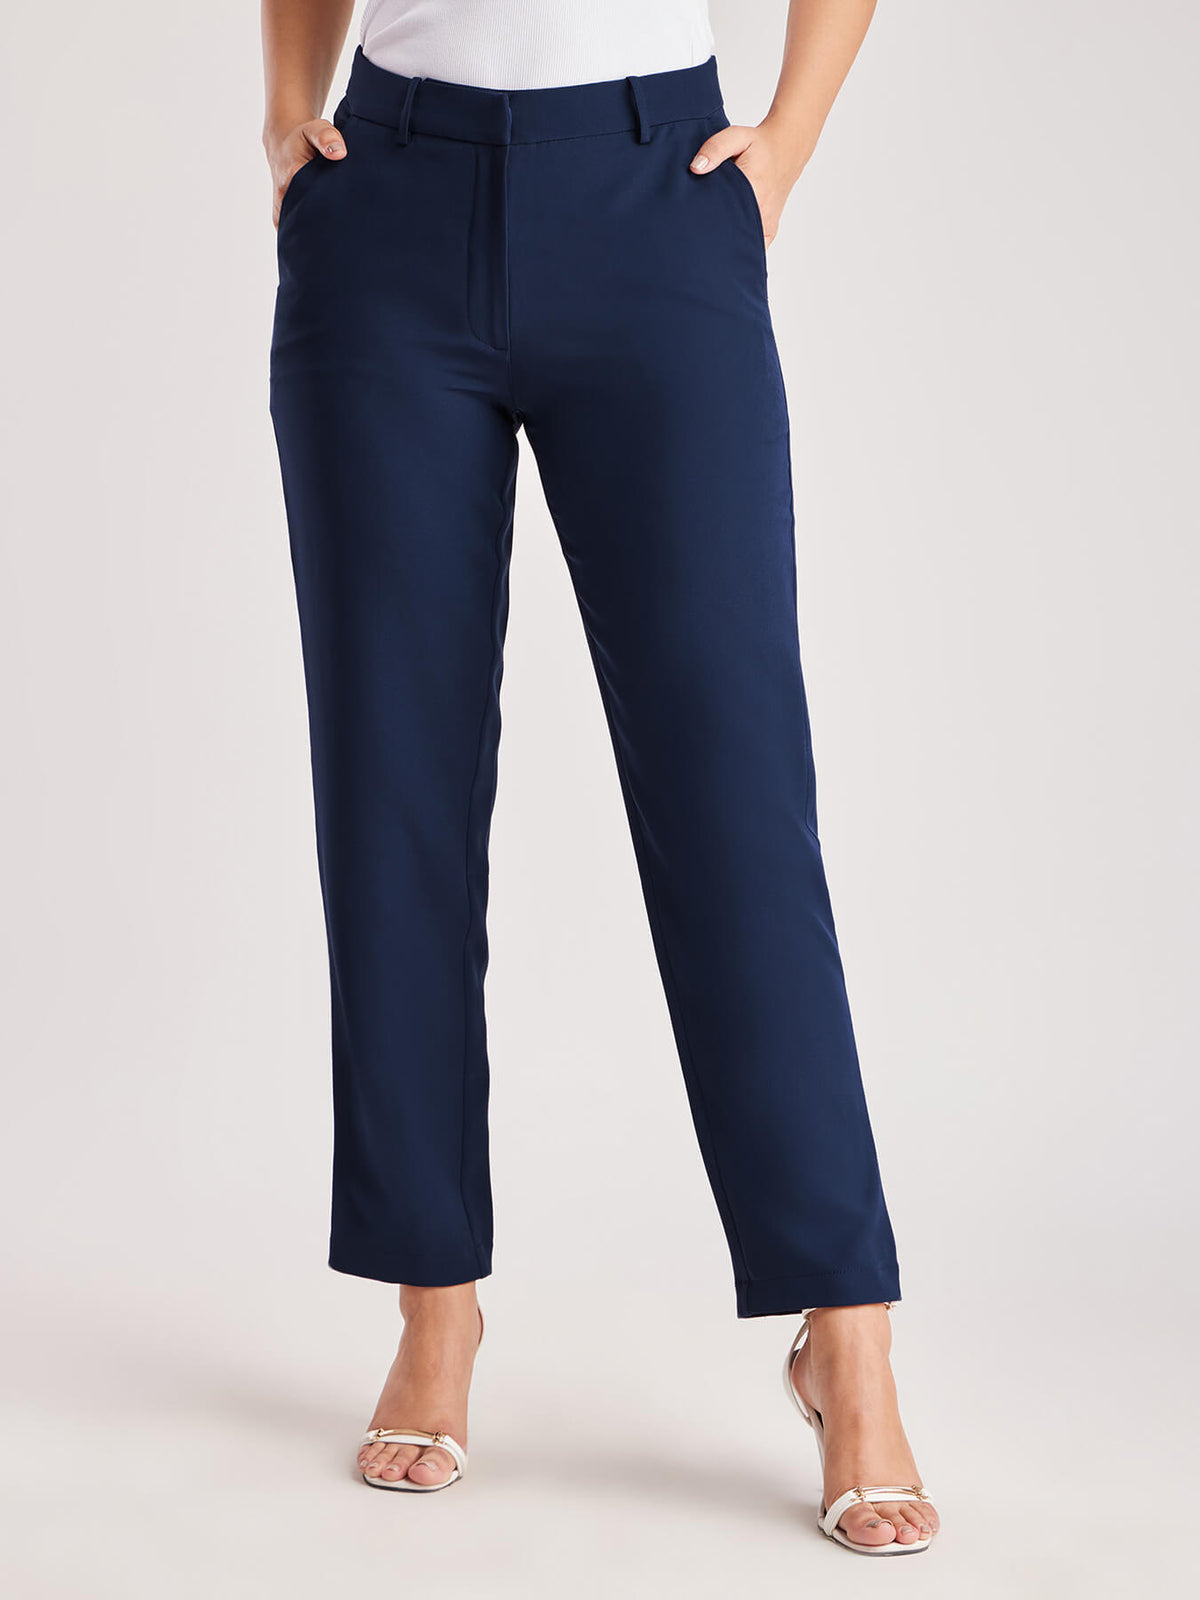 Straight Fit Solid Trousers - Navy Blue